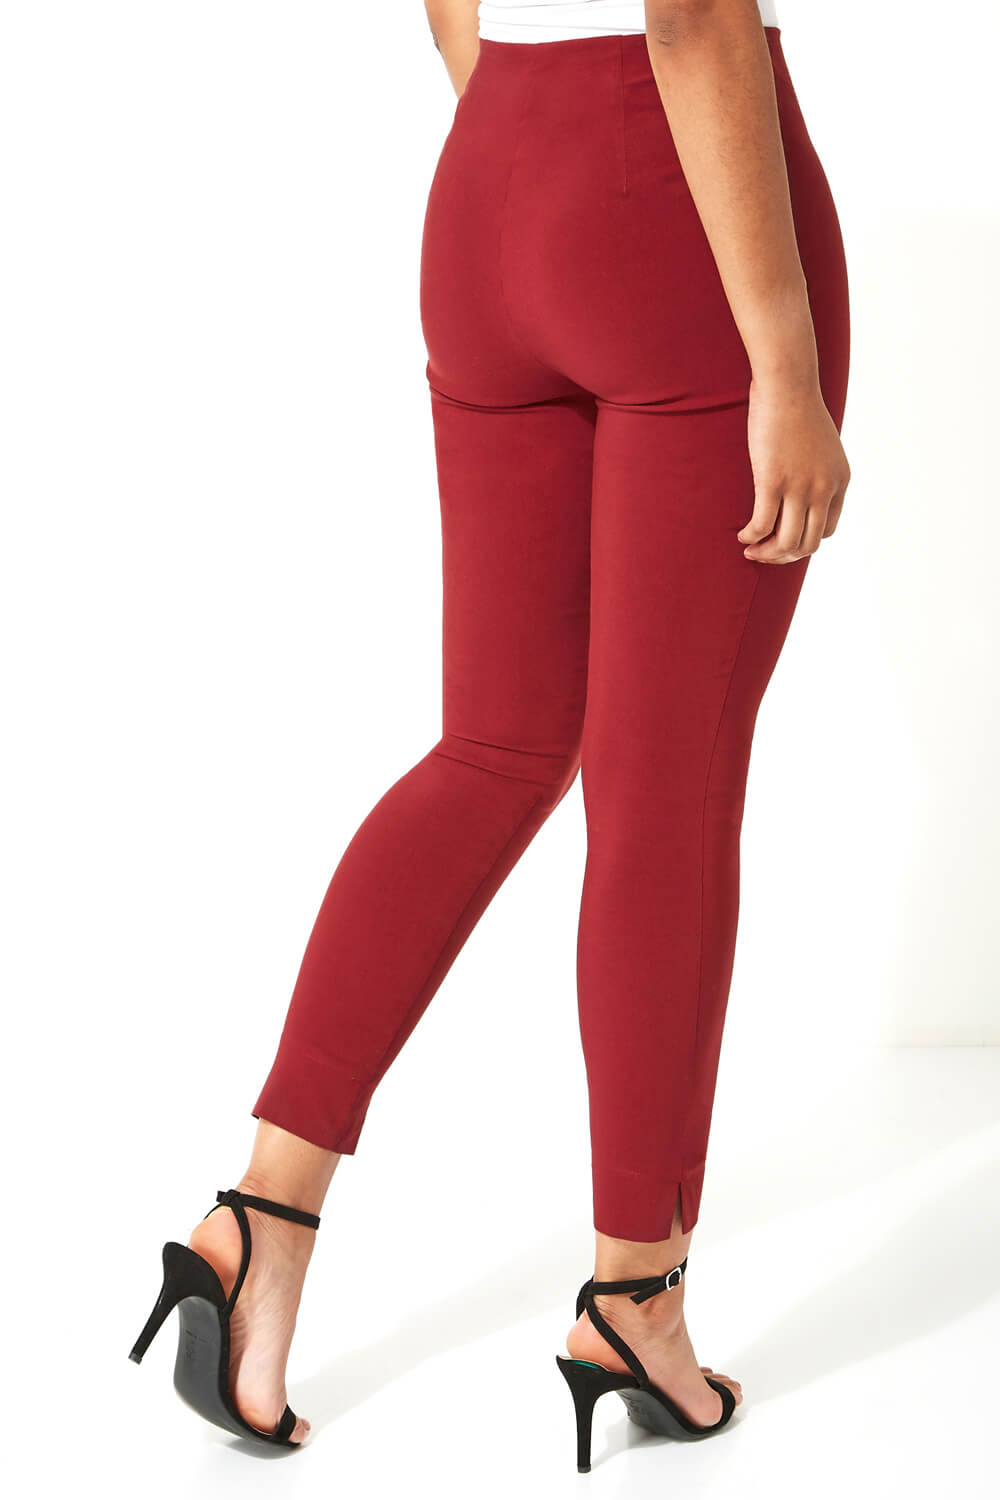 Red Full Length Stretch Trousers, Image 3 of 5